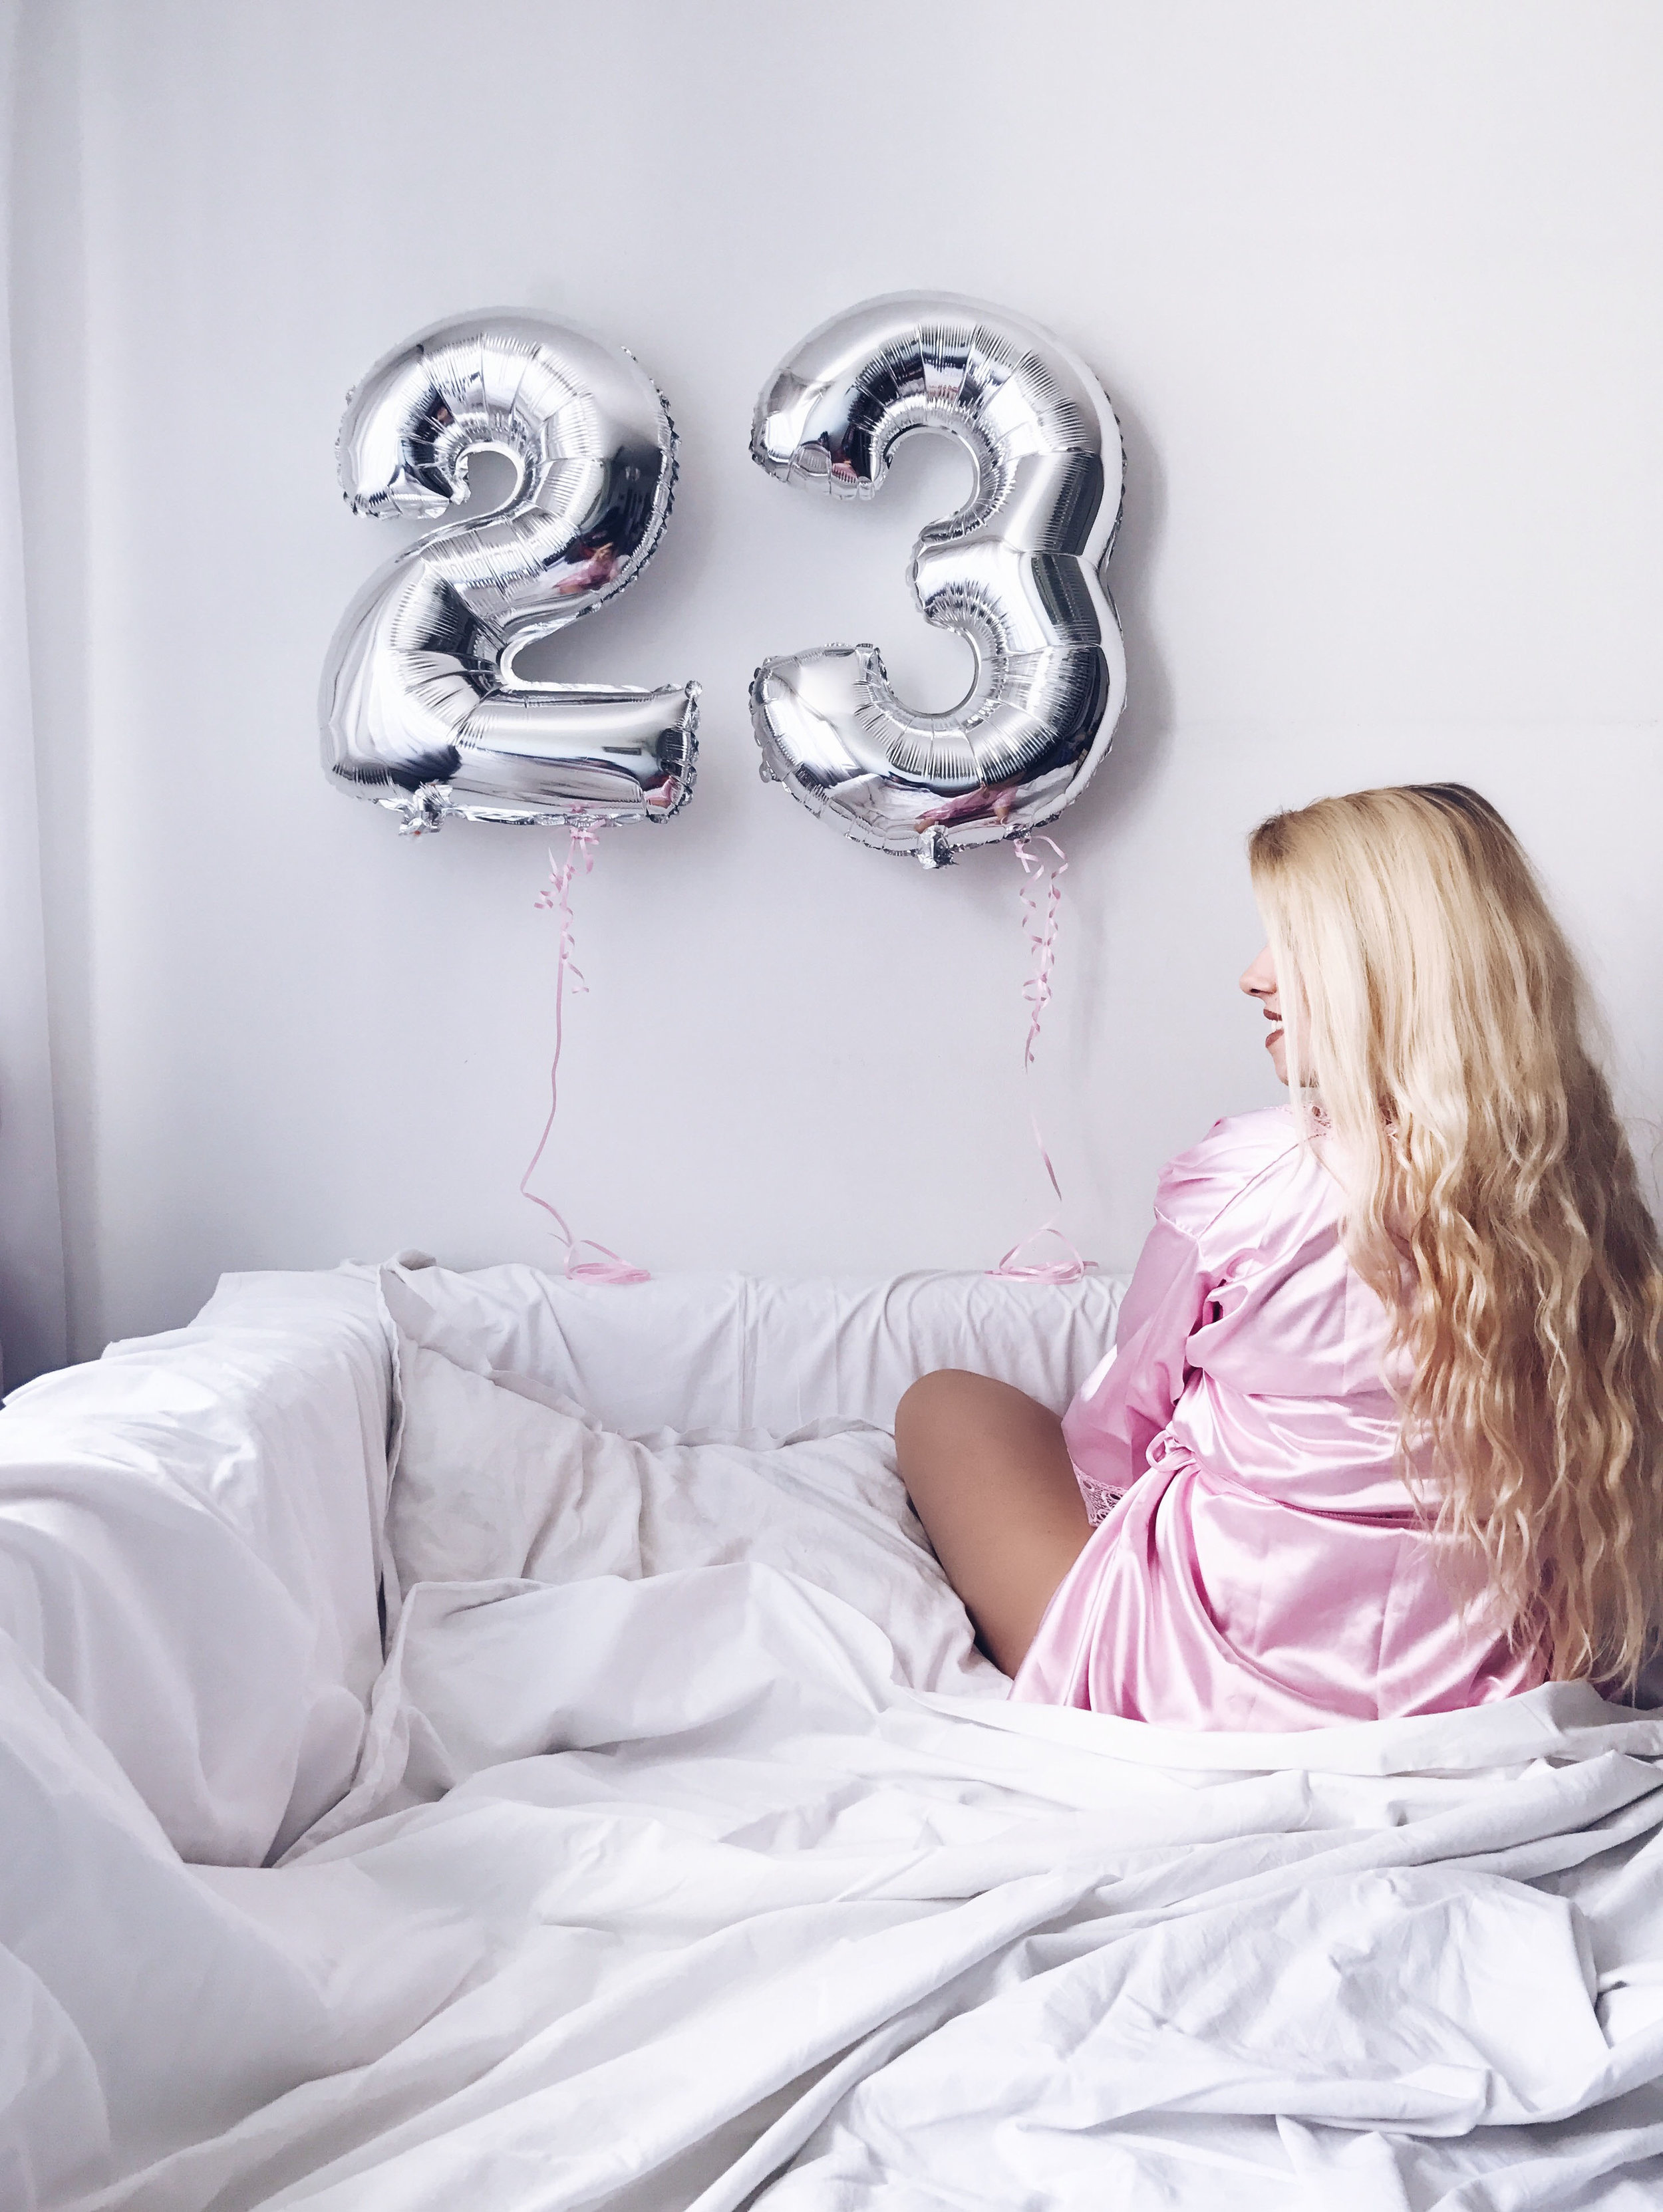 23 things I learned before 23